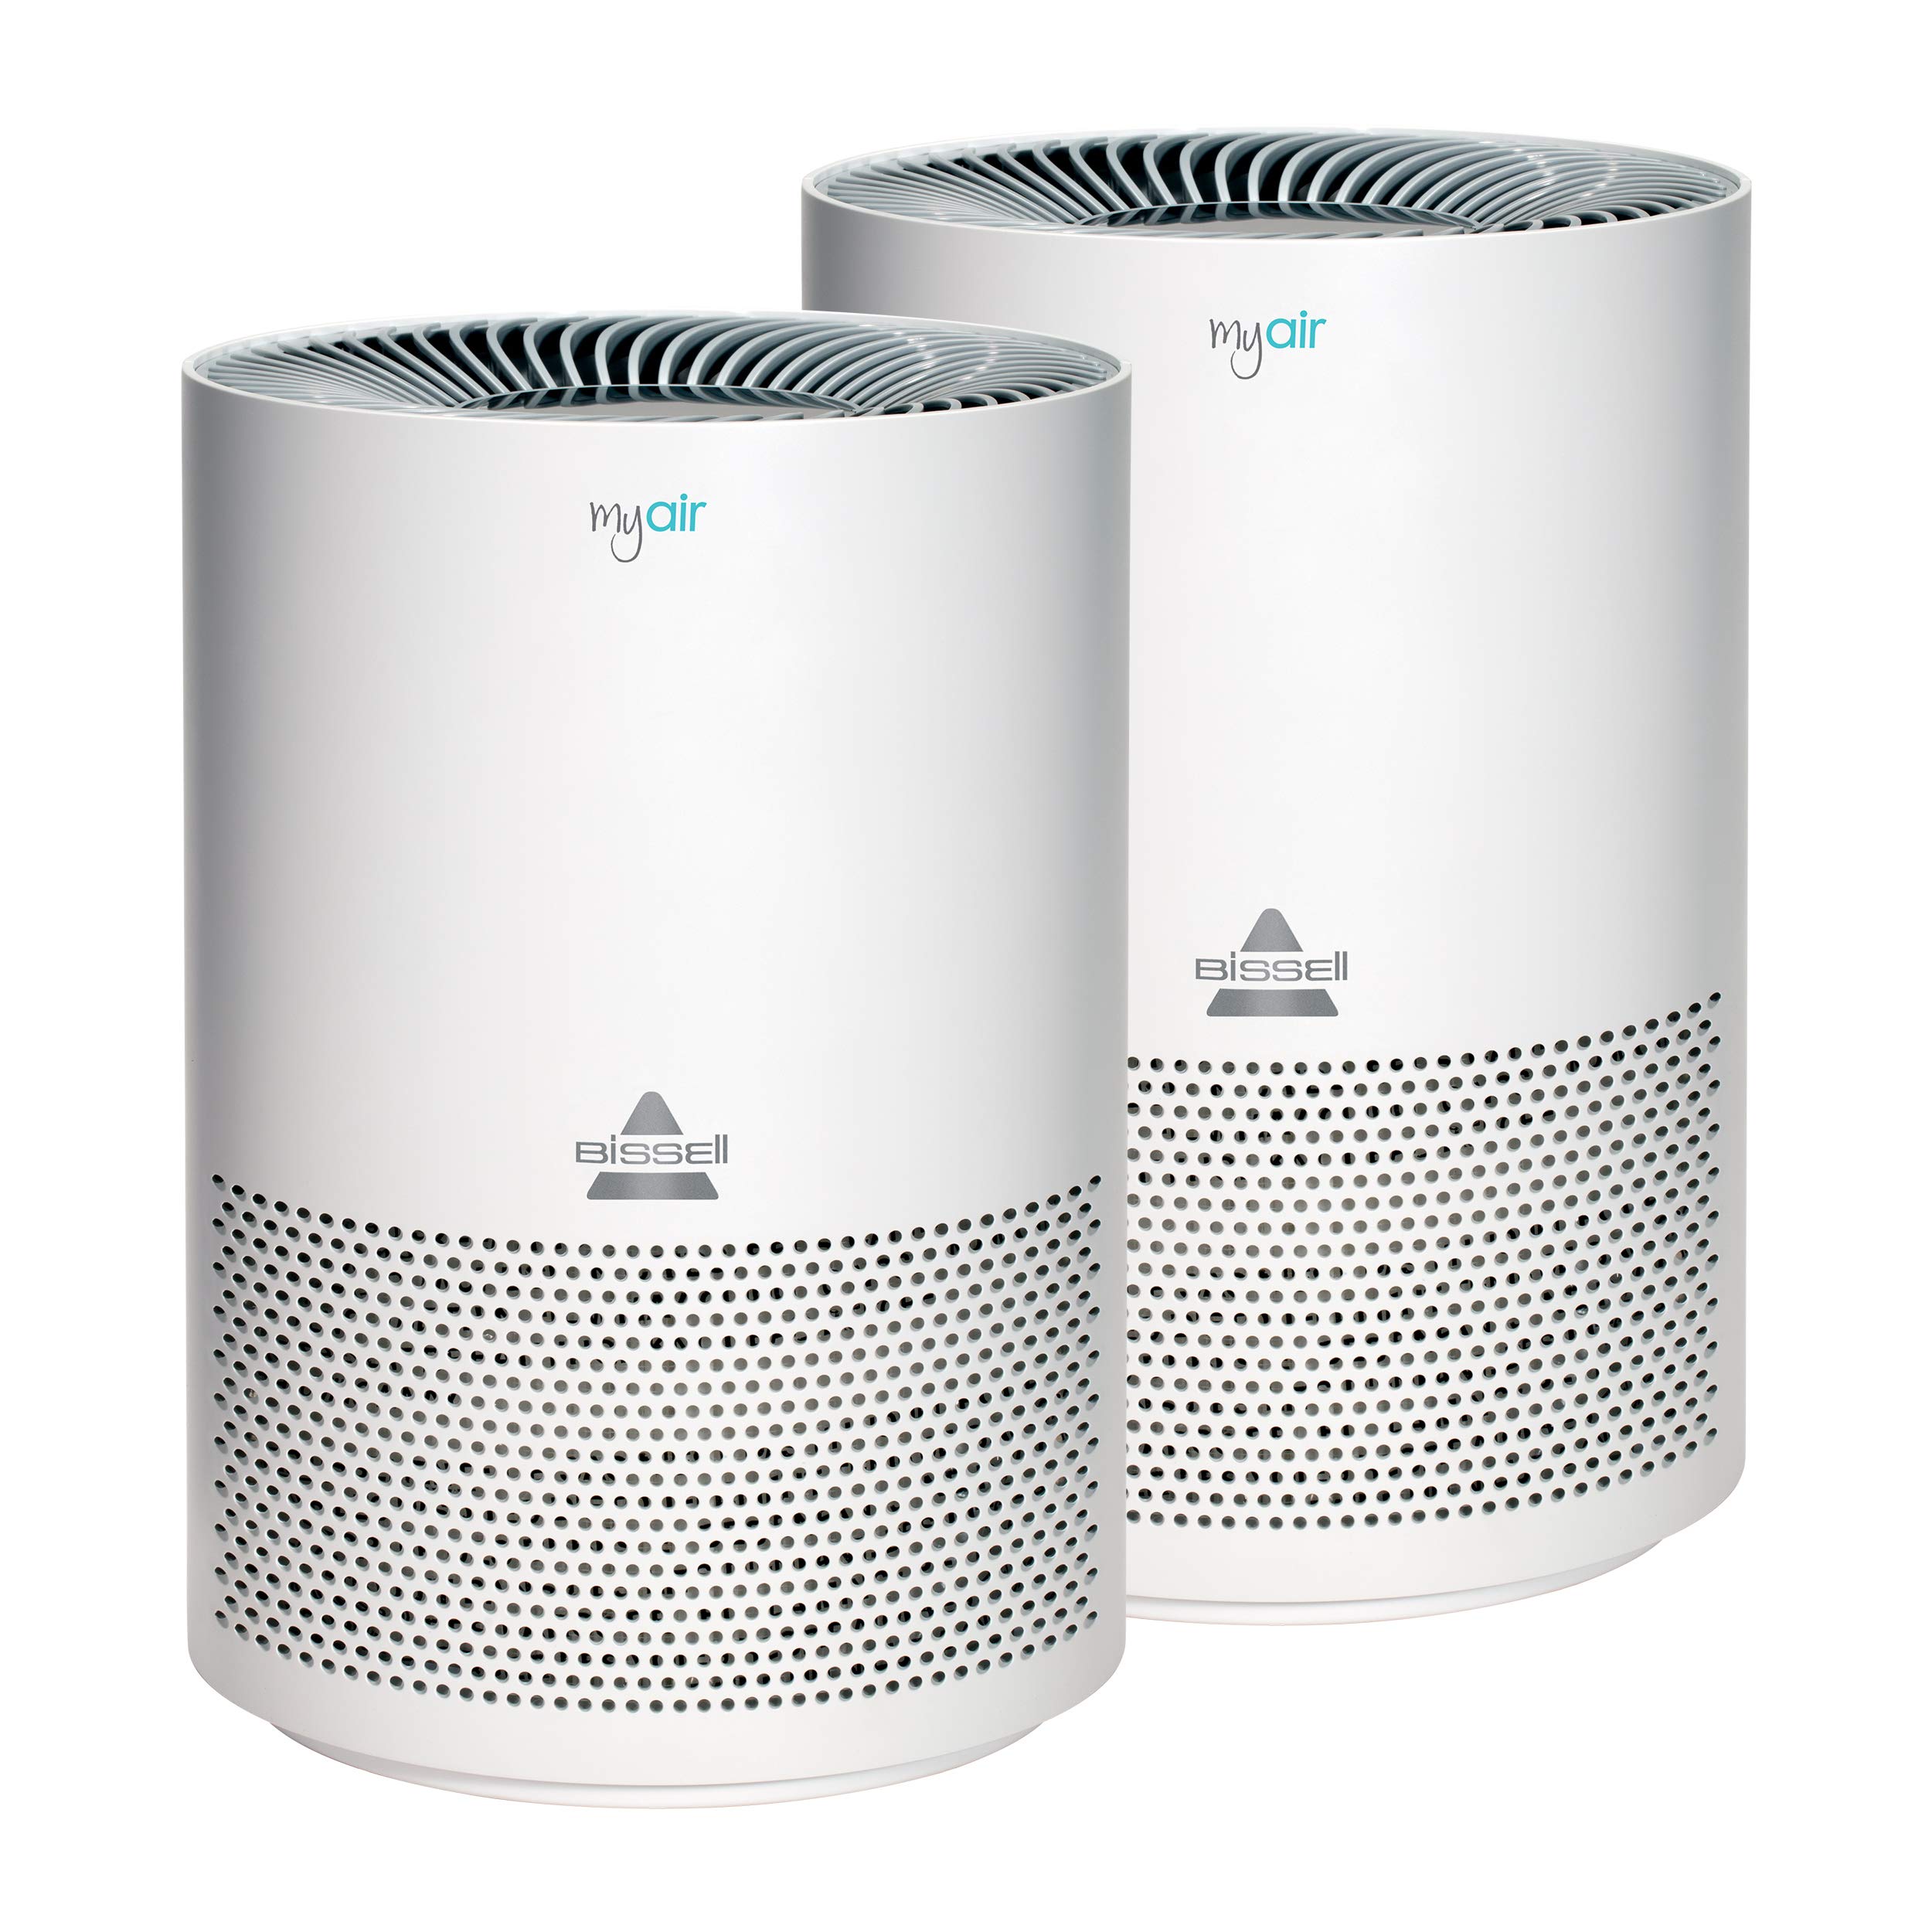 Bissell MYair, 2 Pack, Purifier with High Efficiency and Carbon Filter for Small Room and Home, Quiet Bedroom Air Cleaner for Allergies, Pets, Dust, Dander, Pollen, Smoke, Odors, Timer, 27809, 2 Count